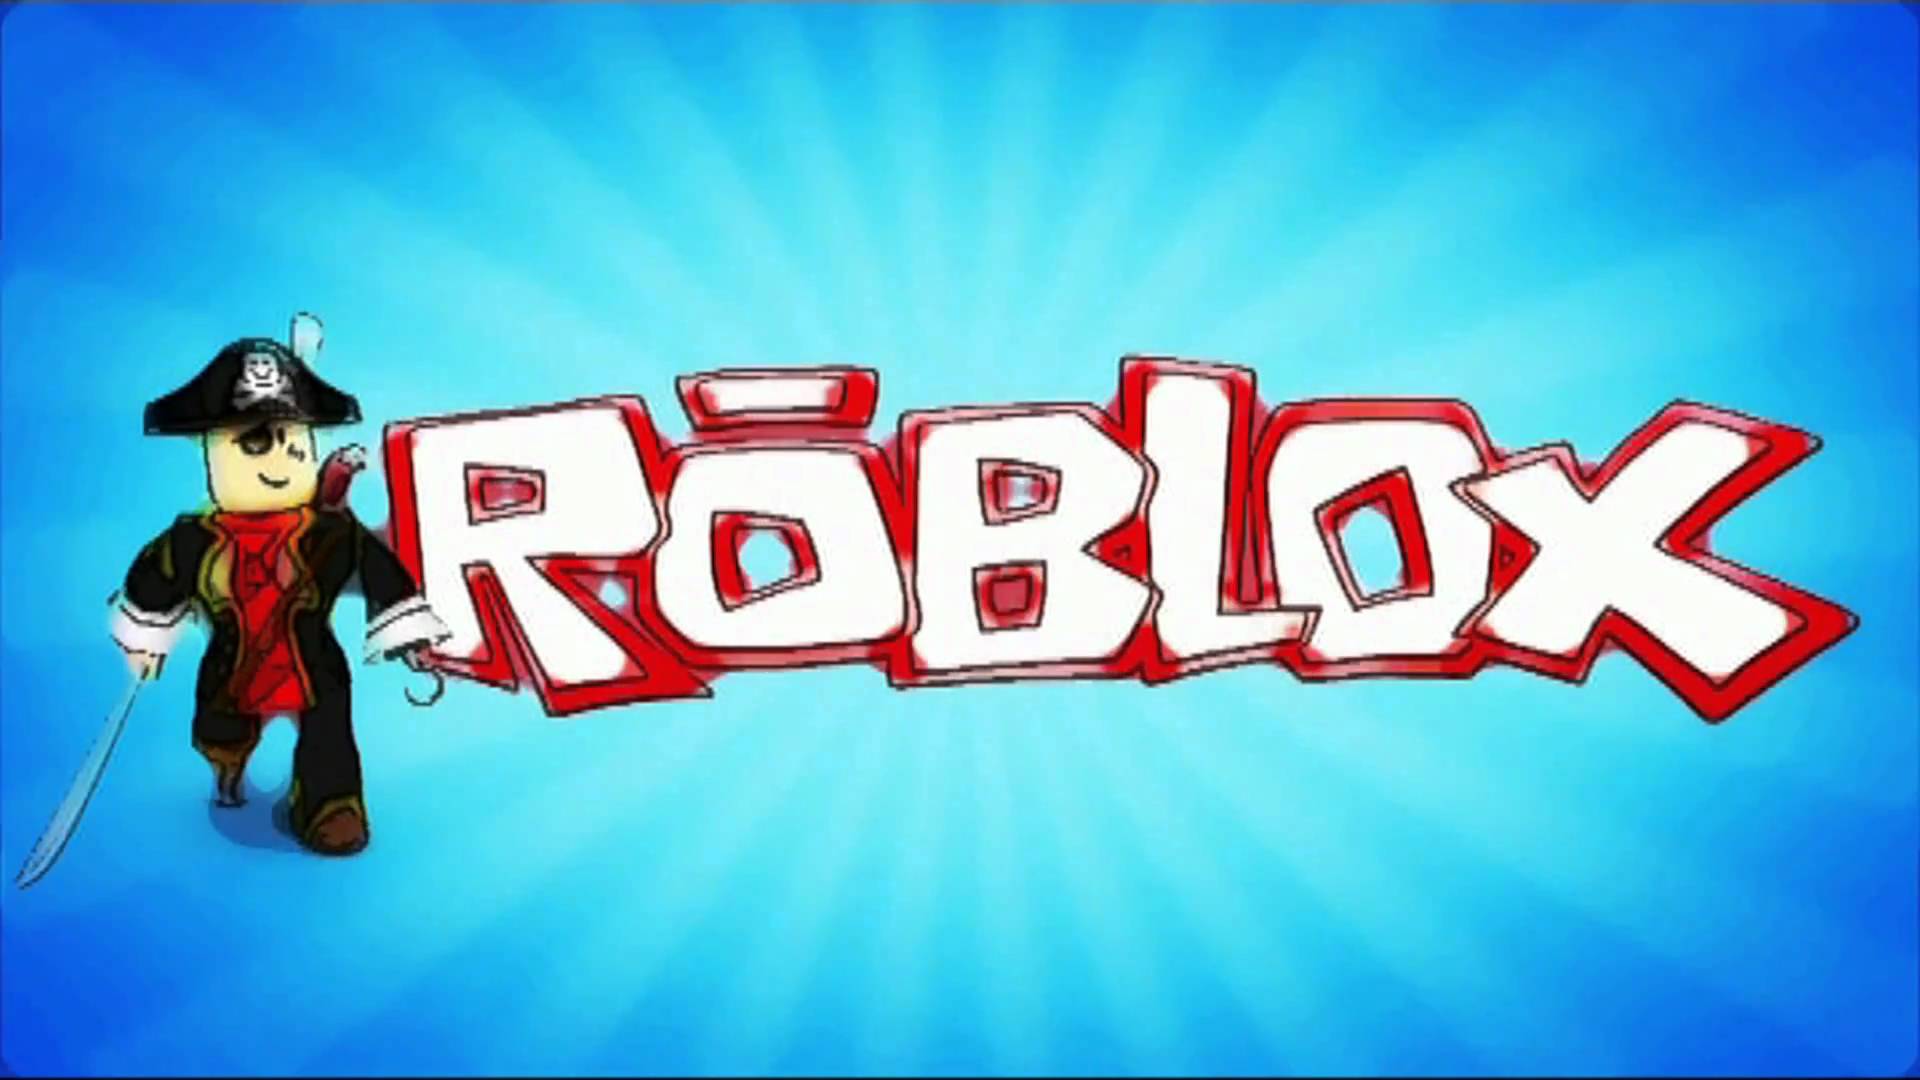 Free Download Roblox Wallpaper Maxresdefaultjpg 1920x1080 For